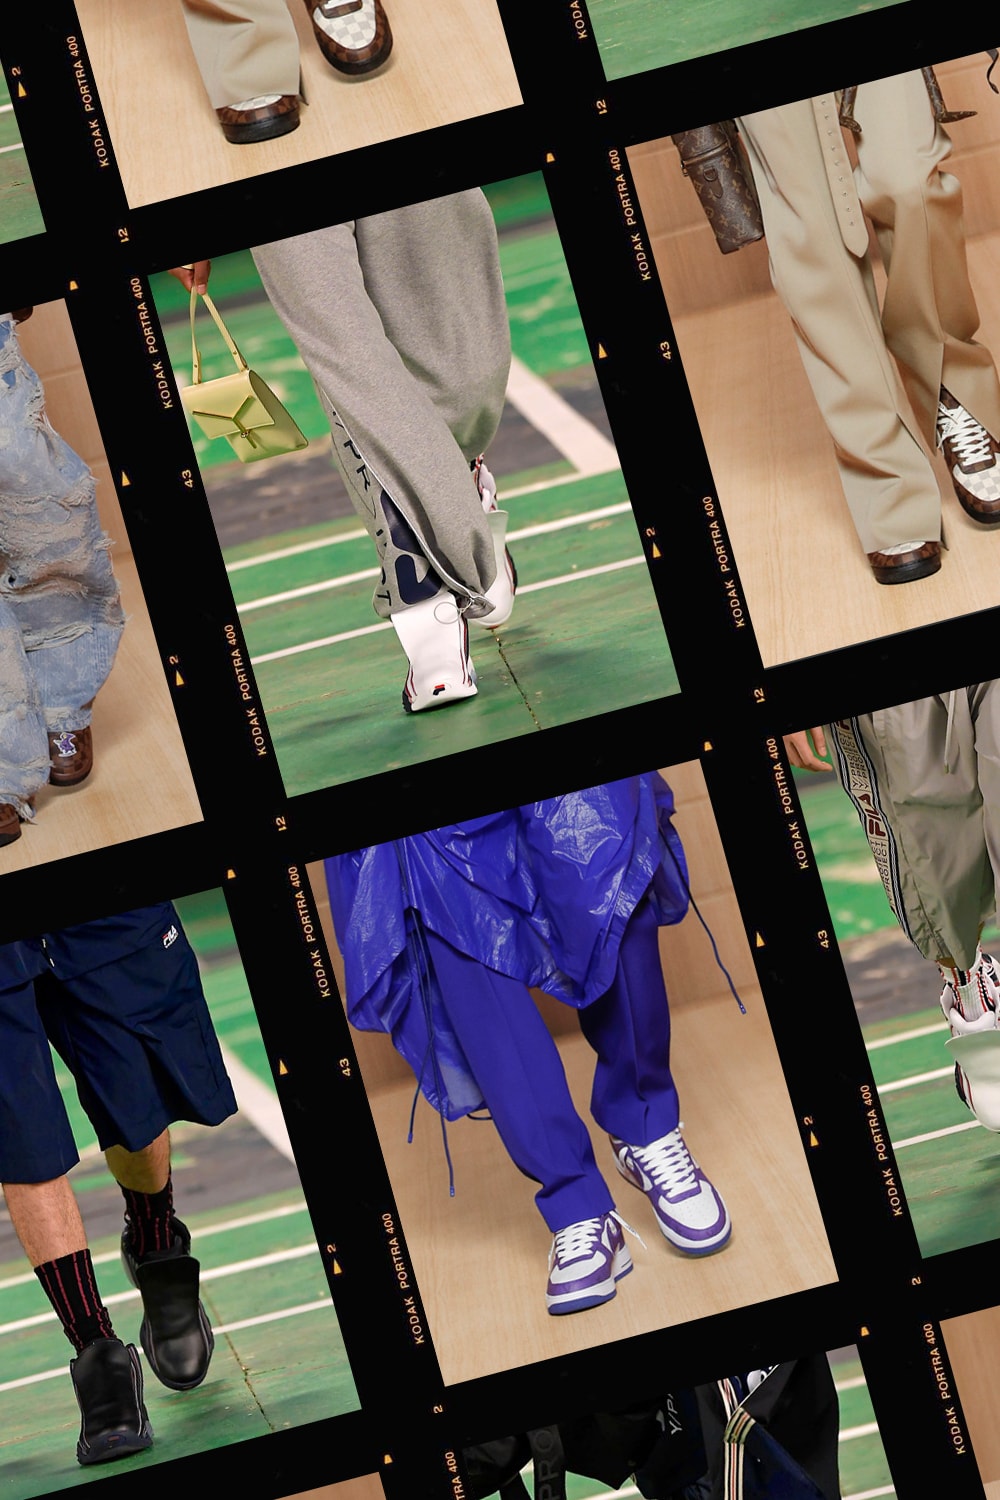 Inventory of 9 major trends in the 2022 Spring/Summer Men's Wear Week: exploring the possibility of joint names, breaking gender boundaries, returning to the western trend...